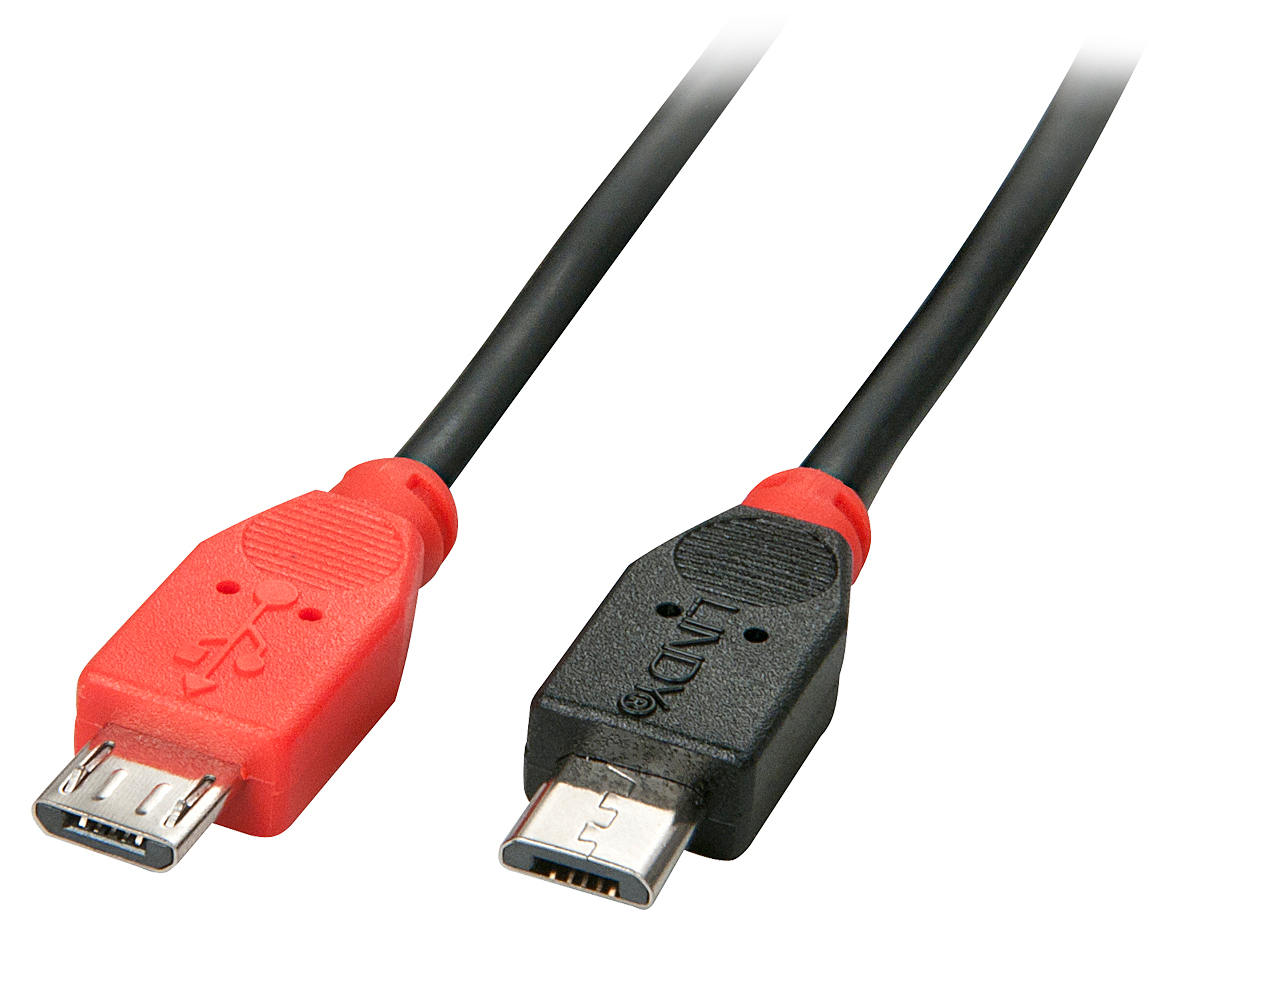 Photos - Cable (video, audio, USB) Lindy 0.5m USB 2.0 Type Micro-B to Micro-B OTG Cable 31758 